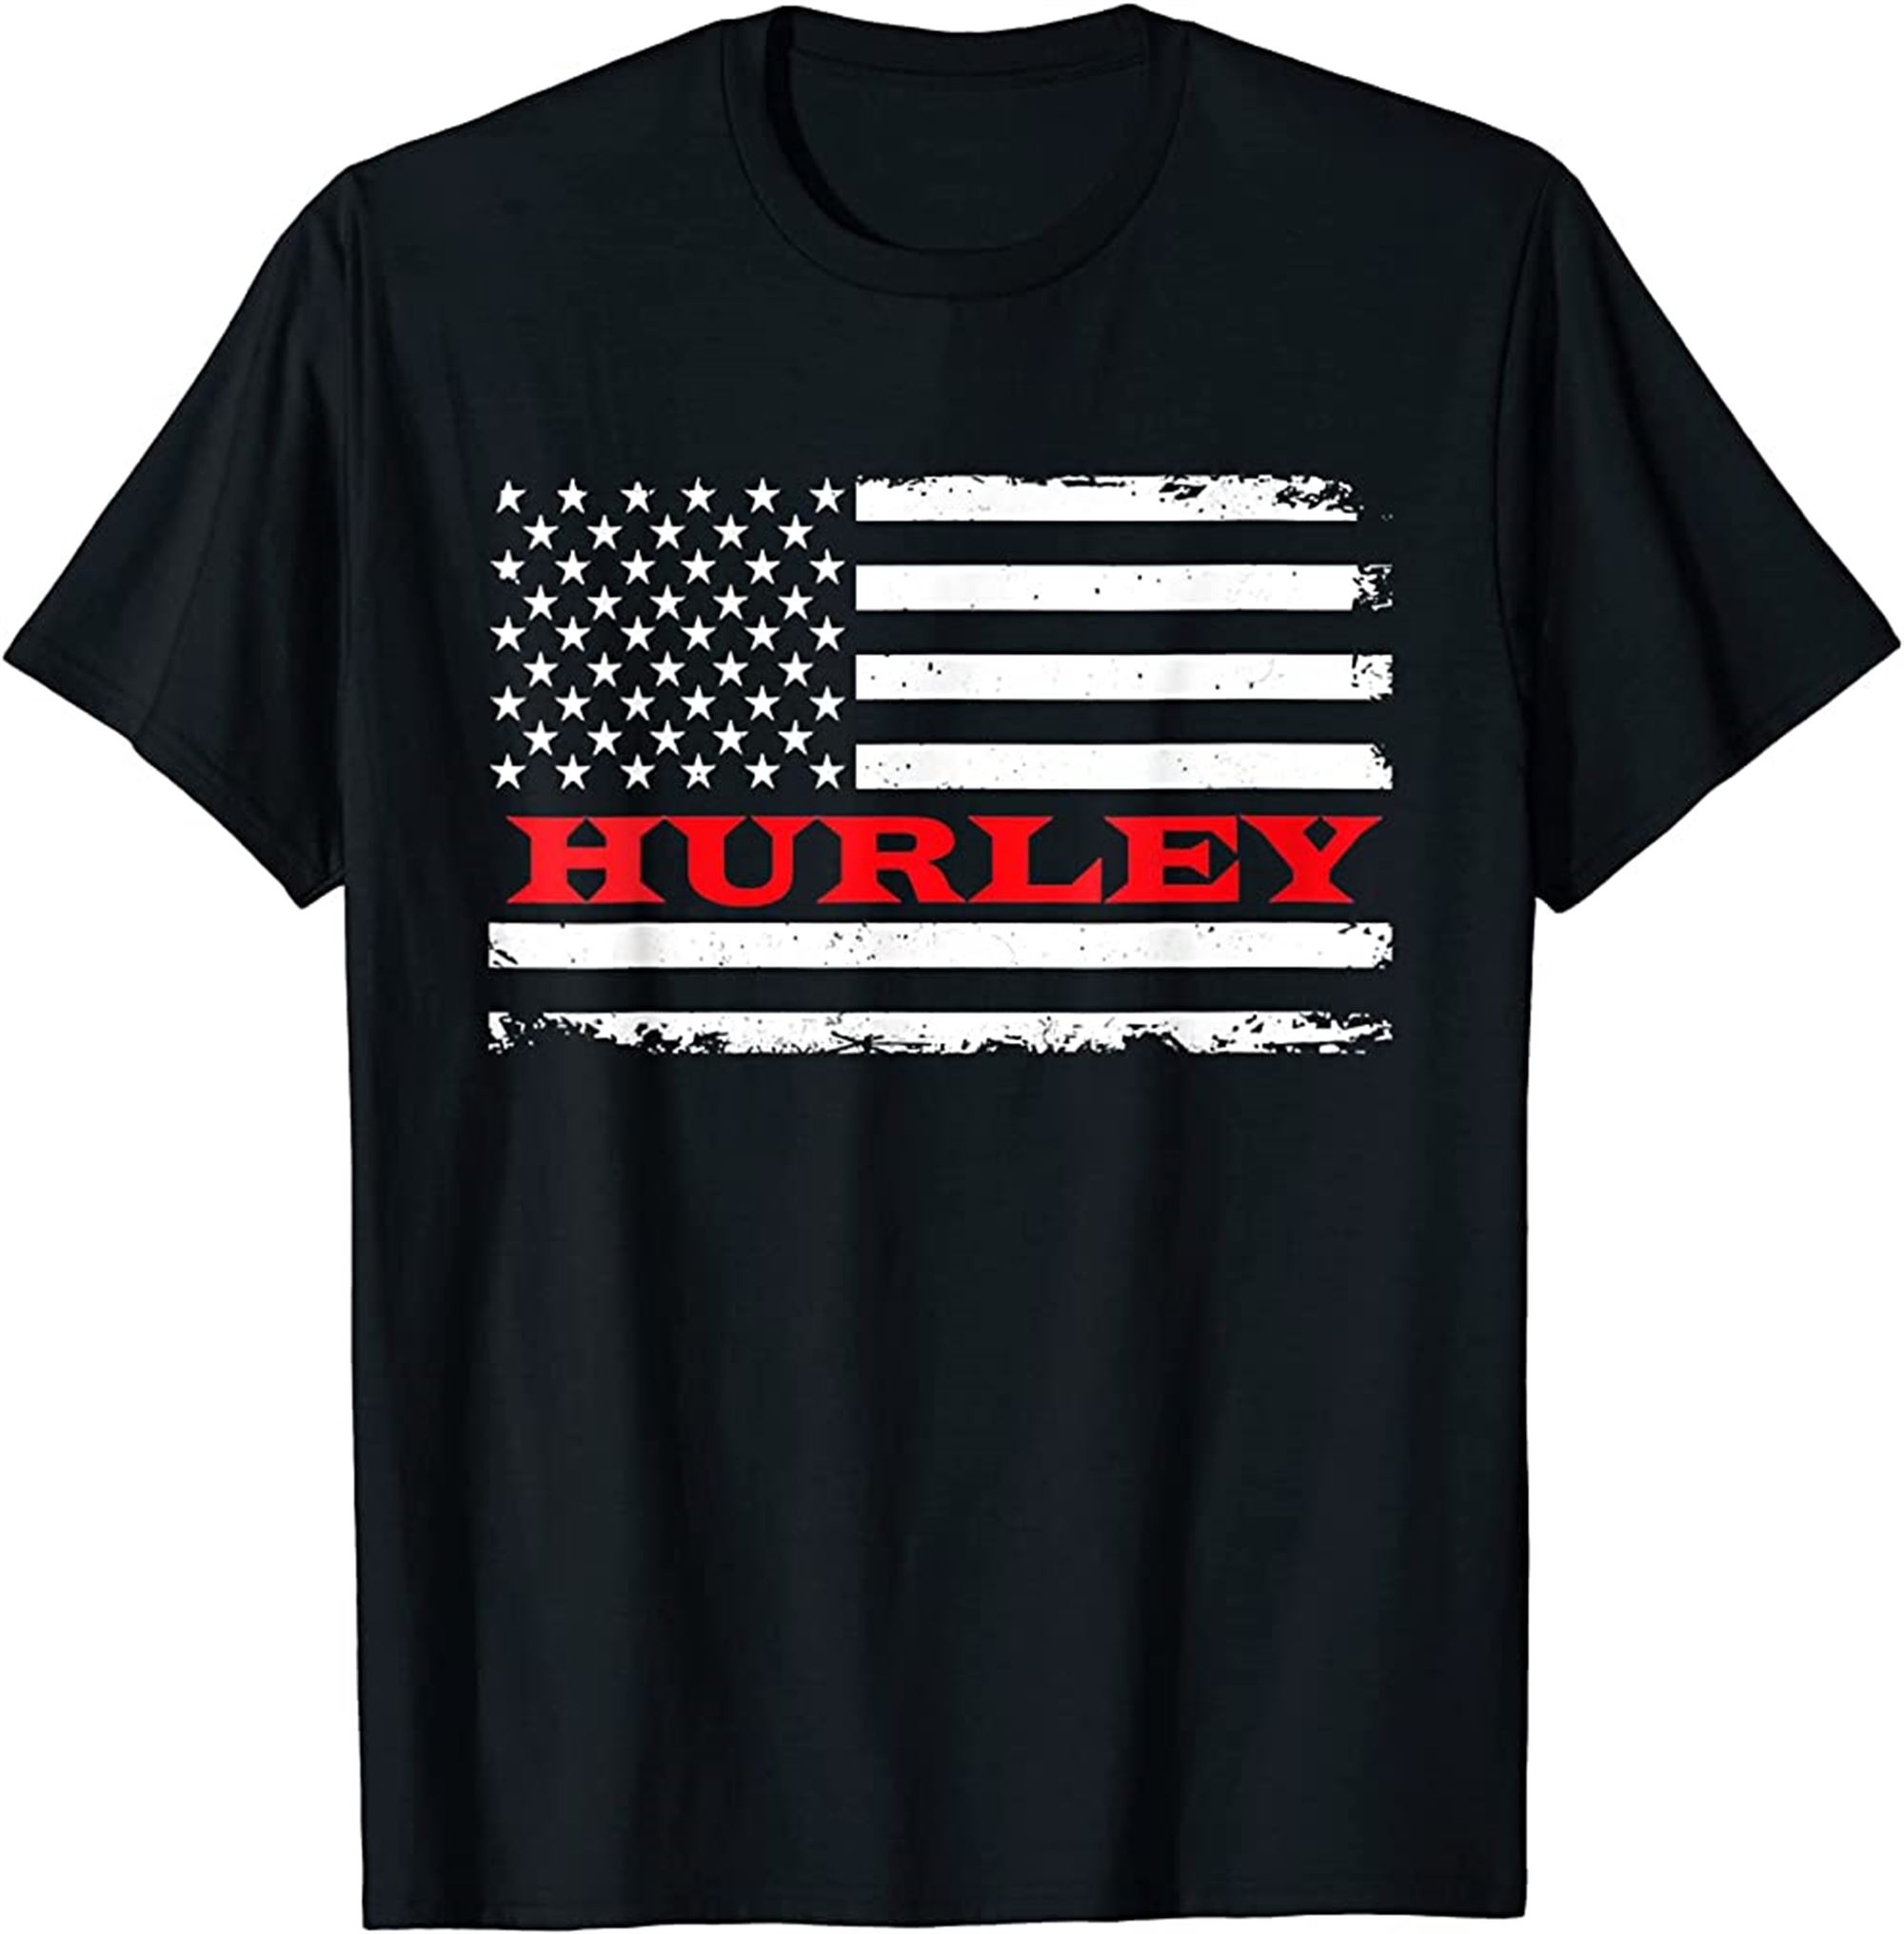 Mississippi American Flag Hurley Usa Patriotic Souvenir T-shirt Size Up To 5xl